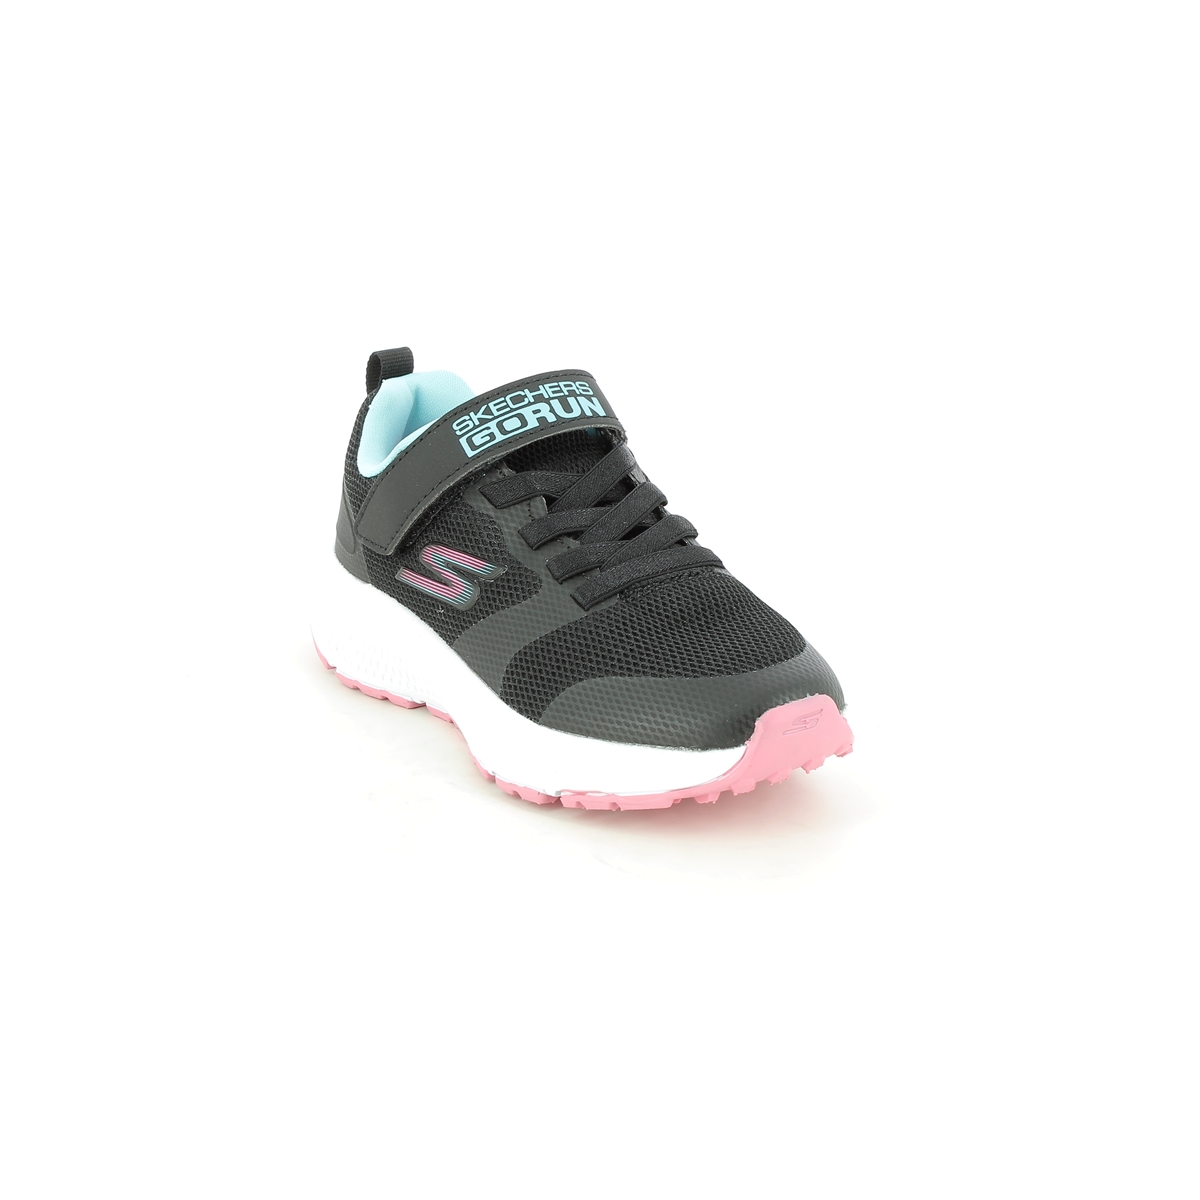 Skechers Go Run Consistent BLK Black Kids girls trainers 302409L in a Plain Man-made in Size 34